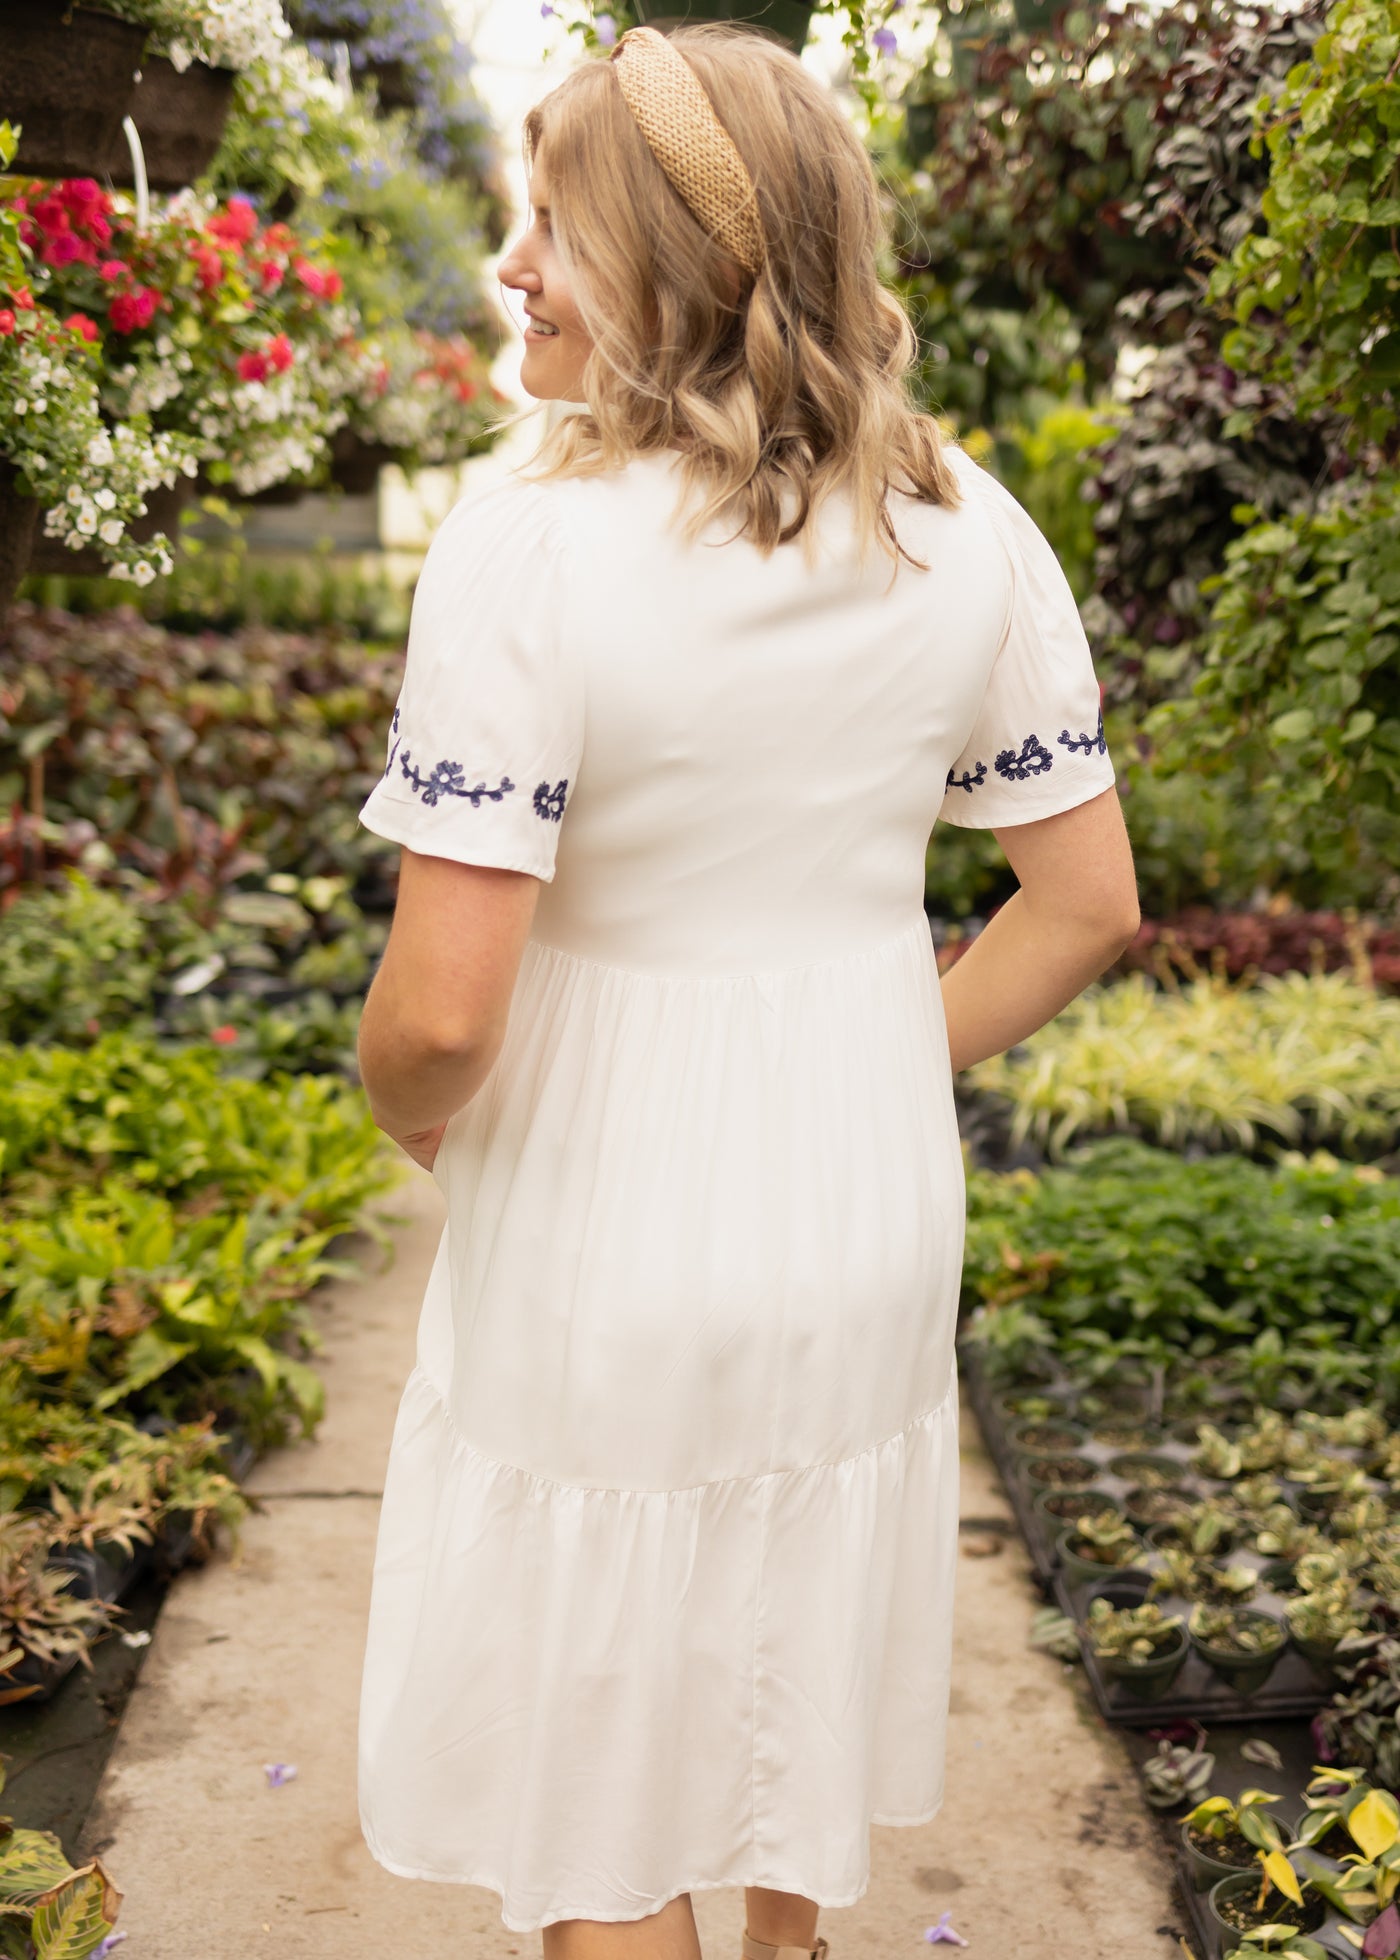 Back view of a short sleeve white dress with embroidery on the sleeves